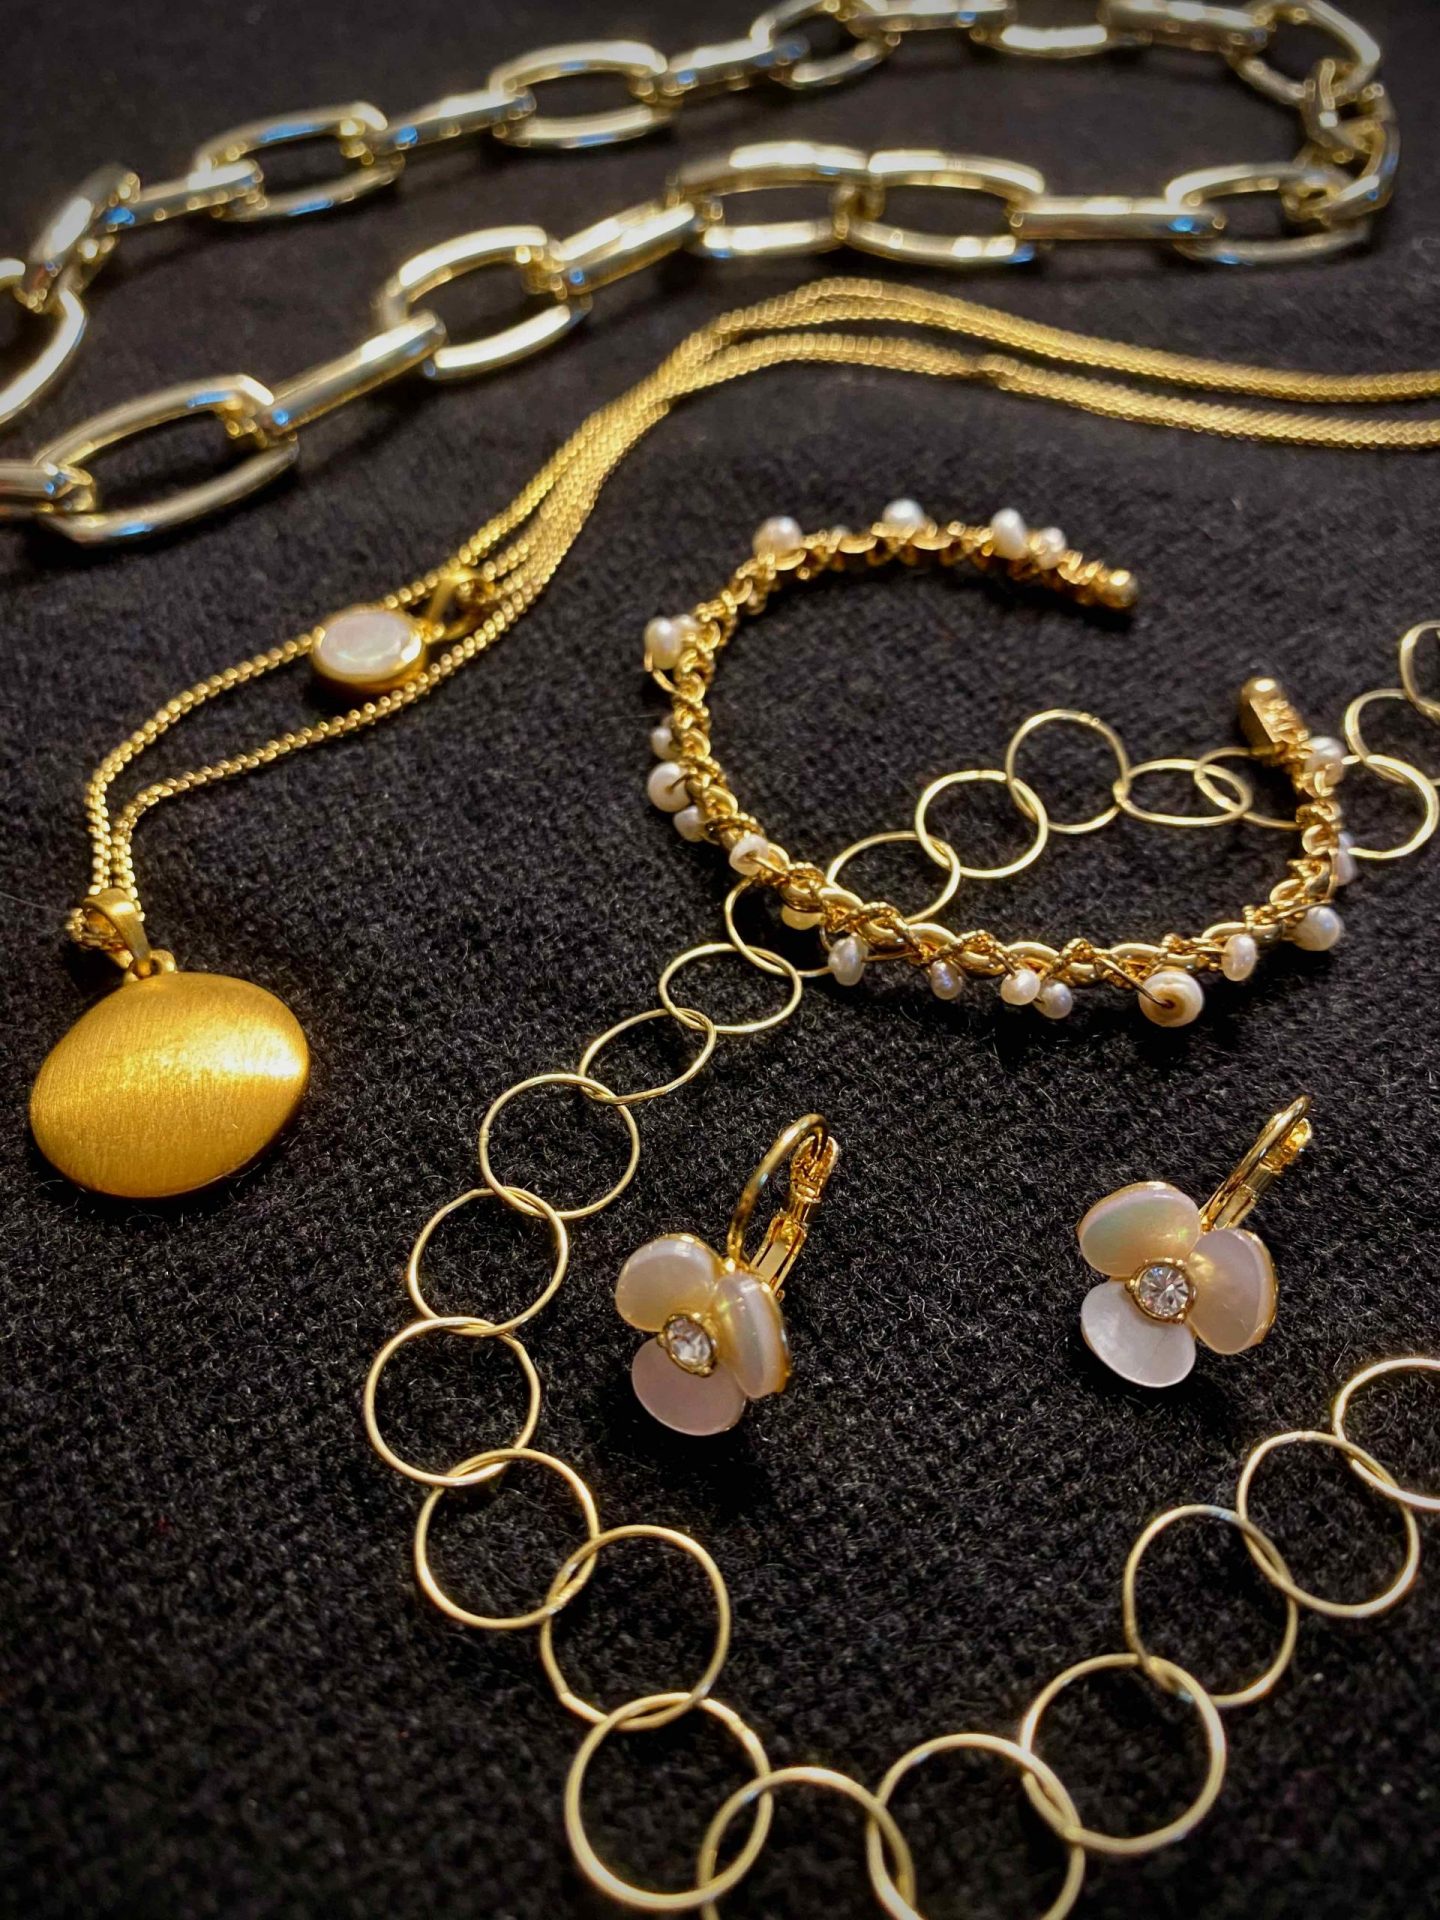 My Favorite Gold Jewelry for Women - The Spectacular Adventurer